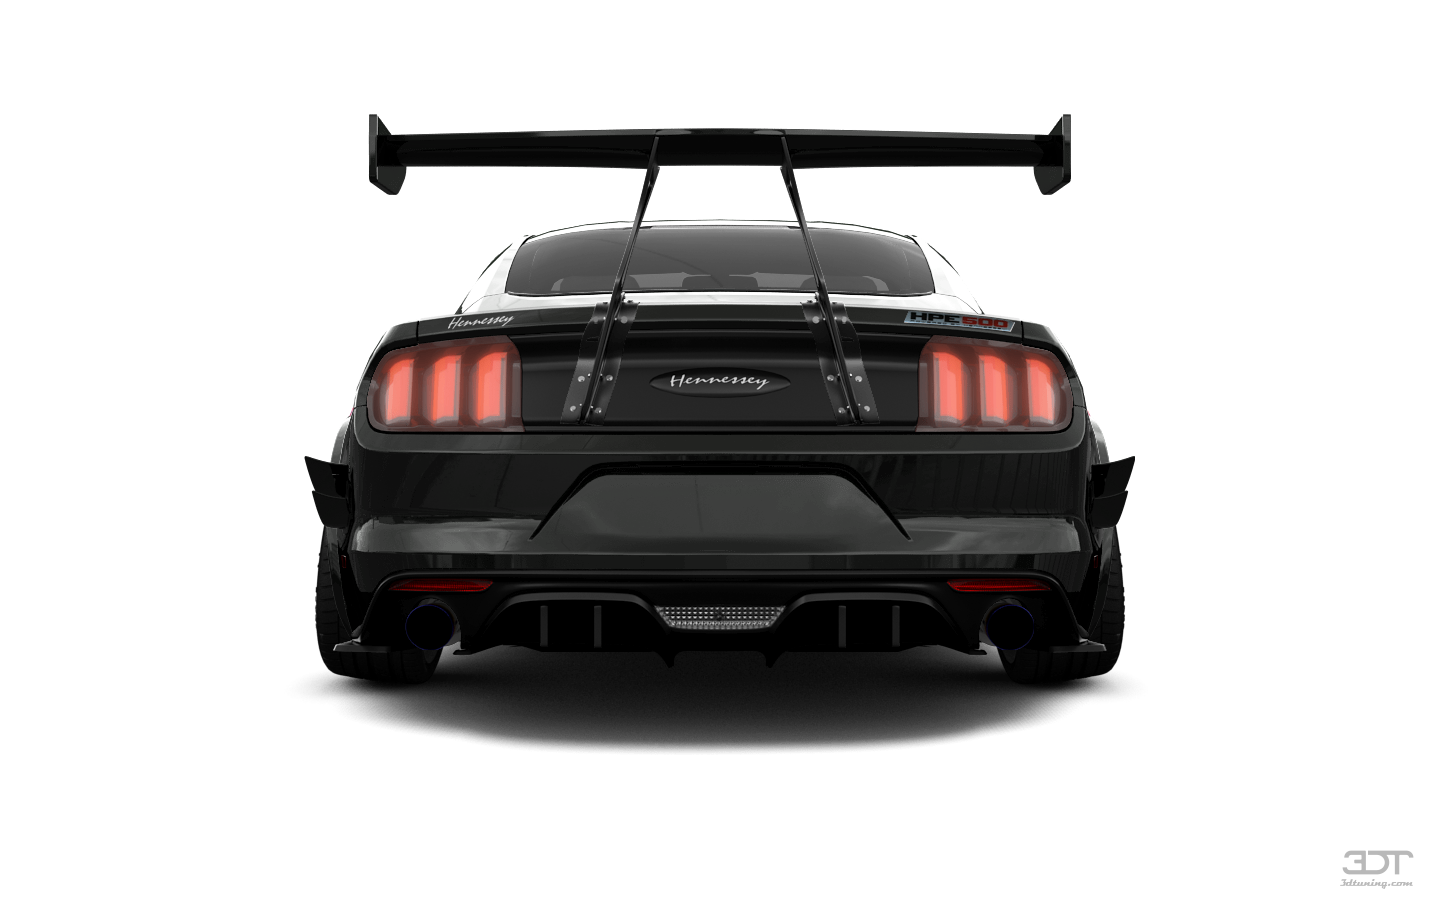 Ford Mustang 2 Door Coupe 2015